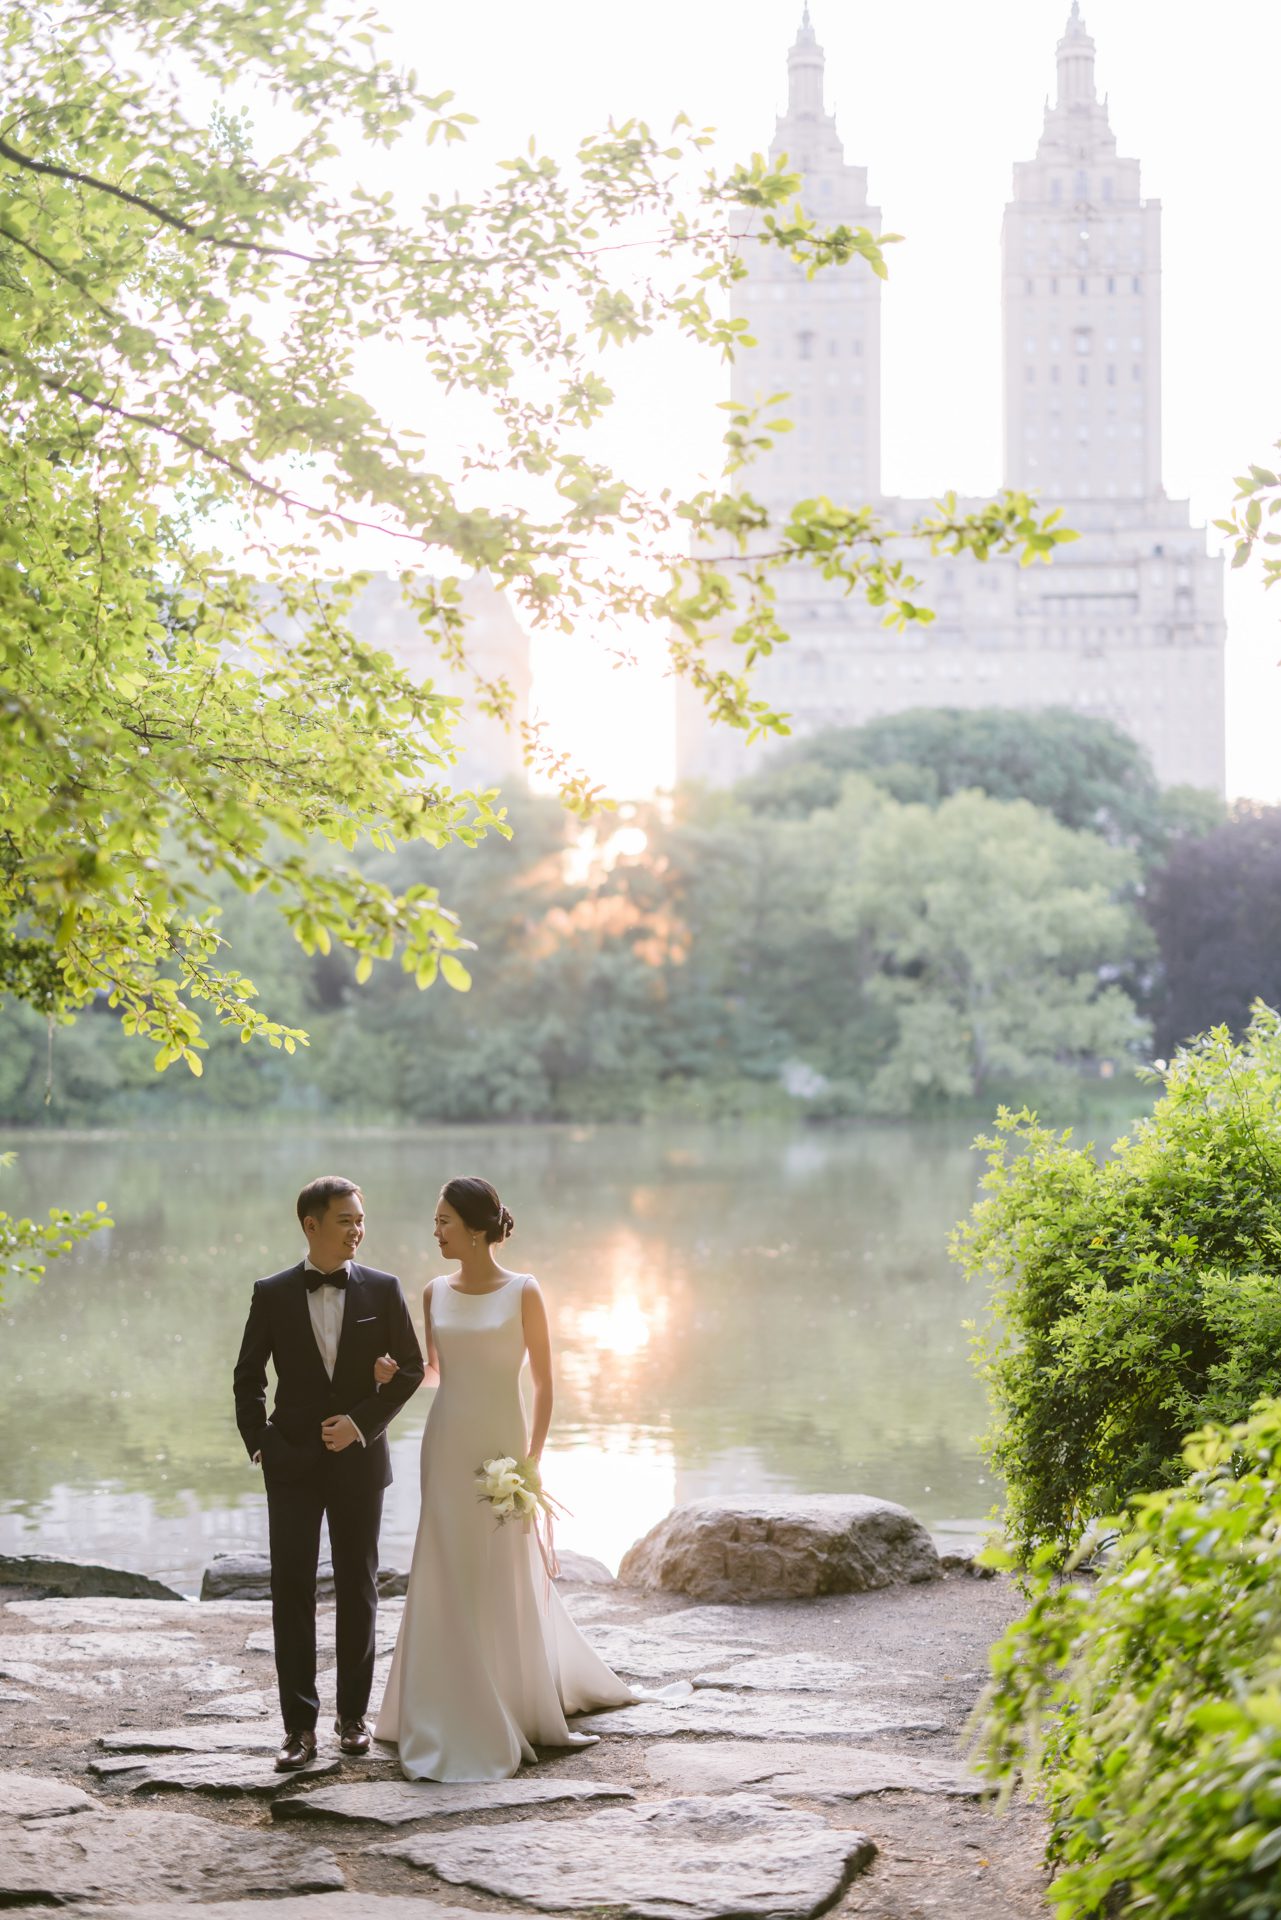 Wedding Pictures at Central Park - New York Wedding Photographer - Yun Li Photography